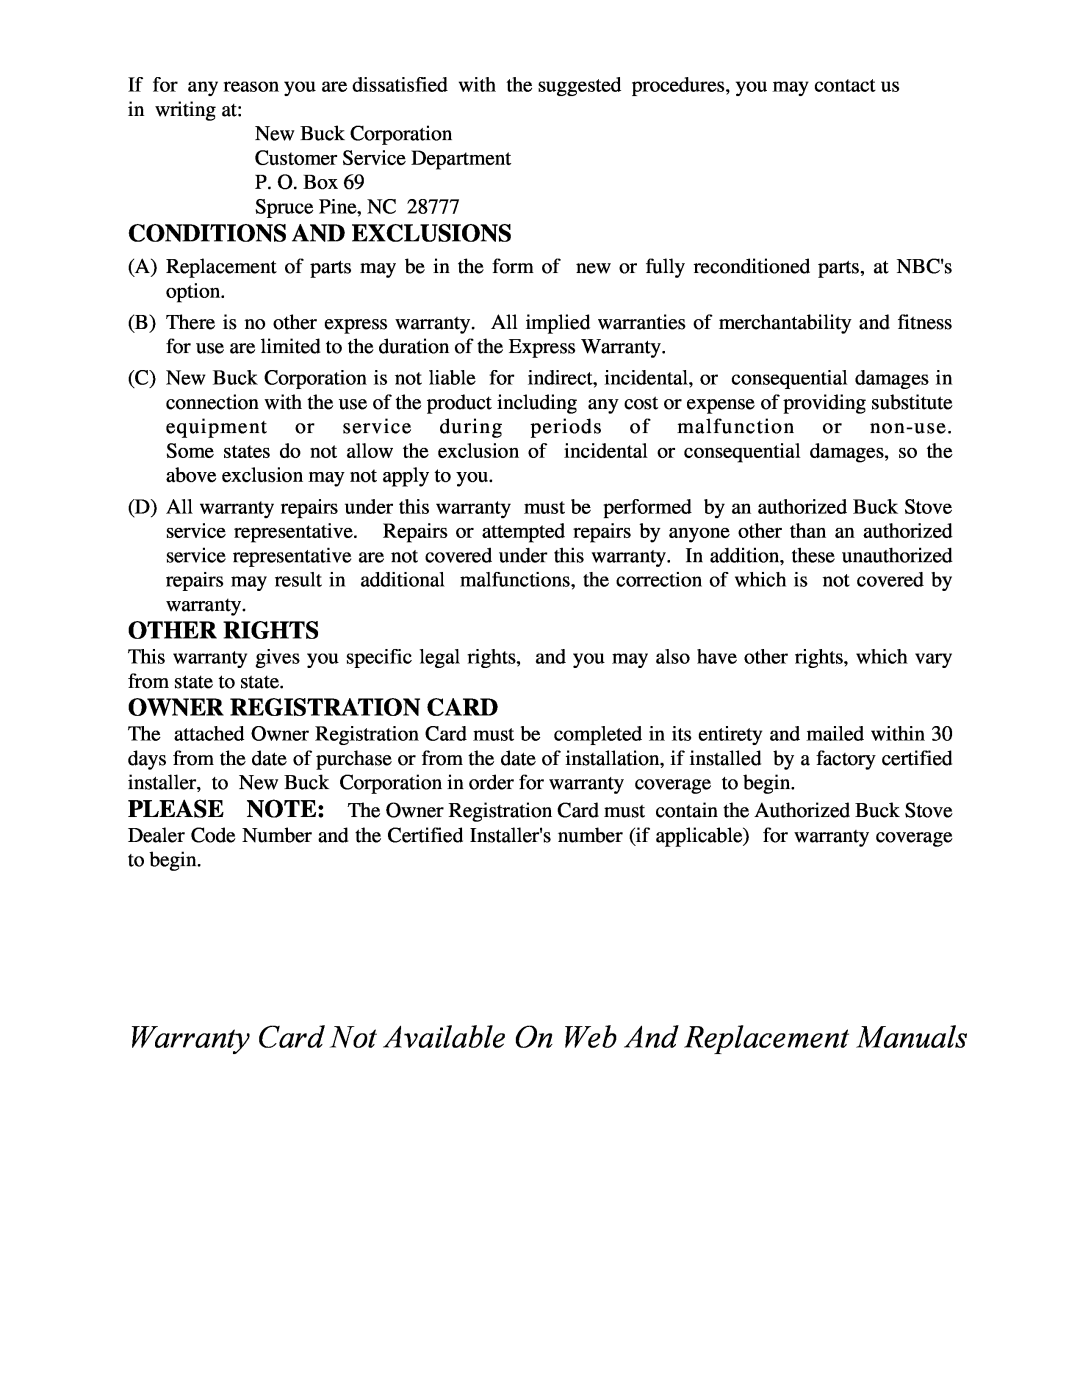 New Buck Corporation 94NC installation instructions Conditions And Exclusions, Other Rights, Owner Registration Card 